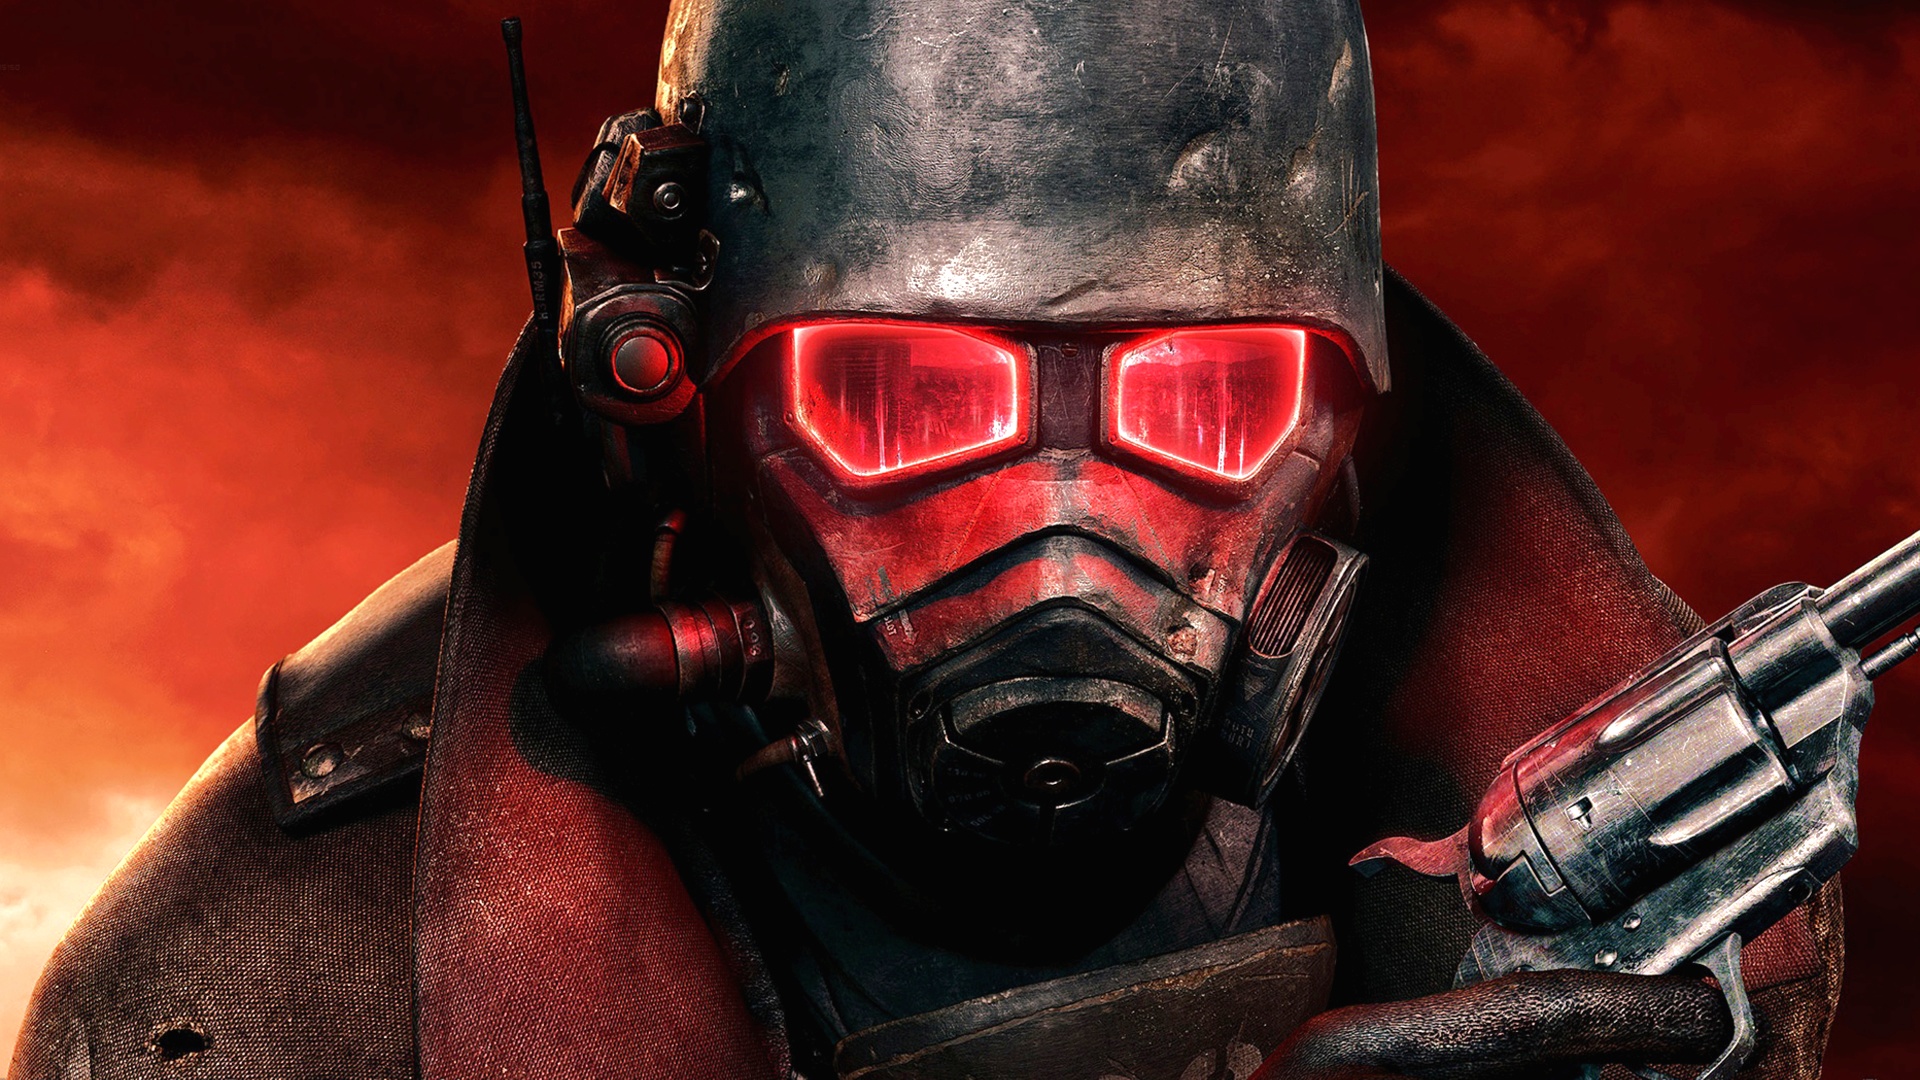 Fallout: New Vegas 2 reportedly leaked with a Release Period